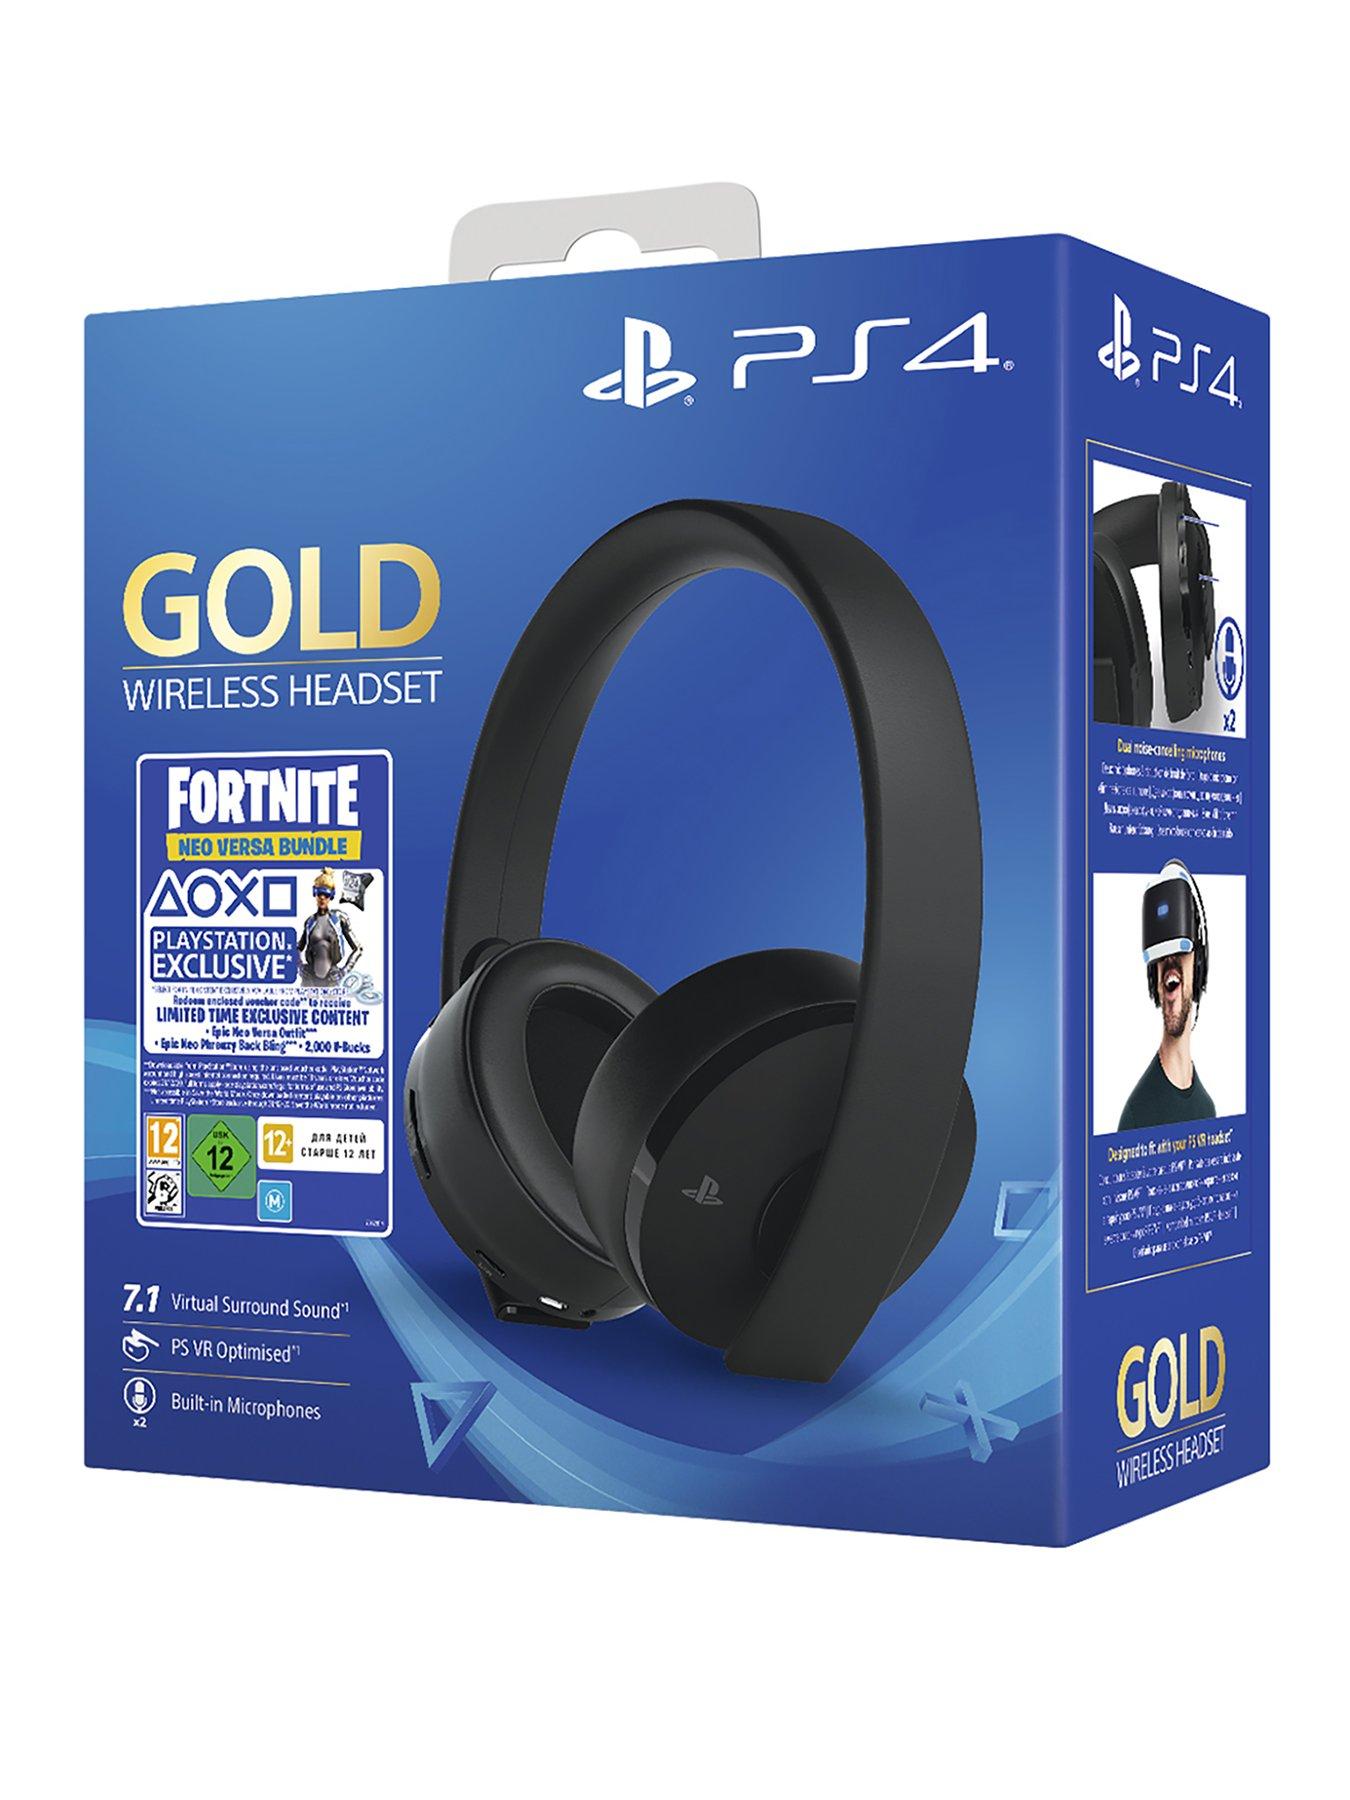 sony playstation gold wireless headset 7.1 surround sound ps4 new version 2018